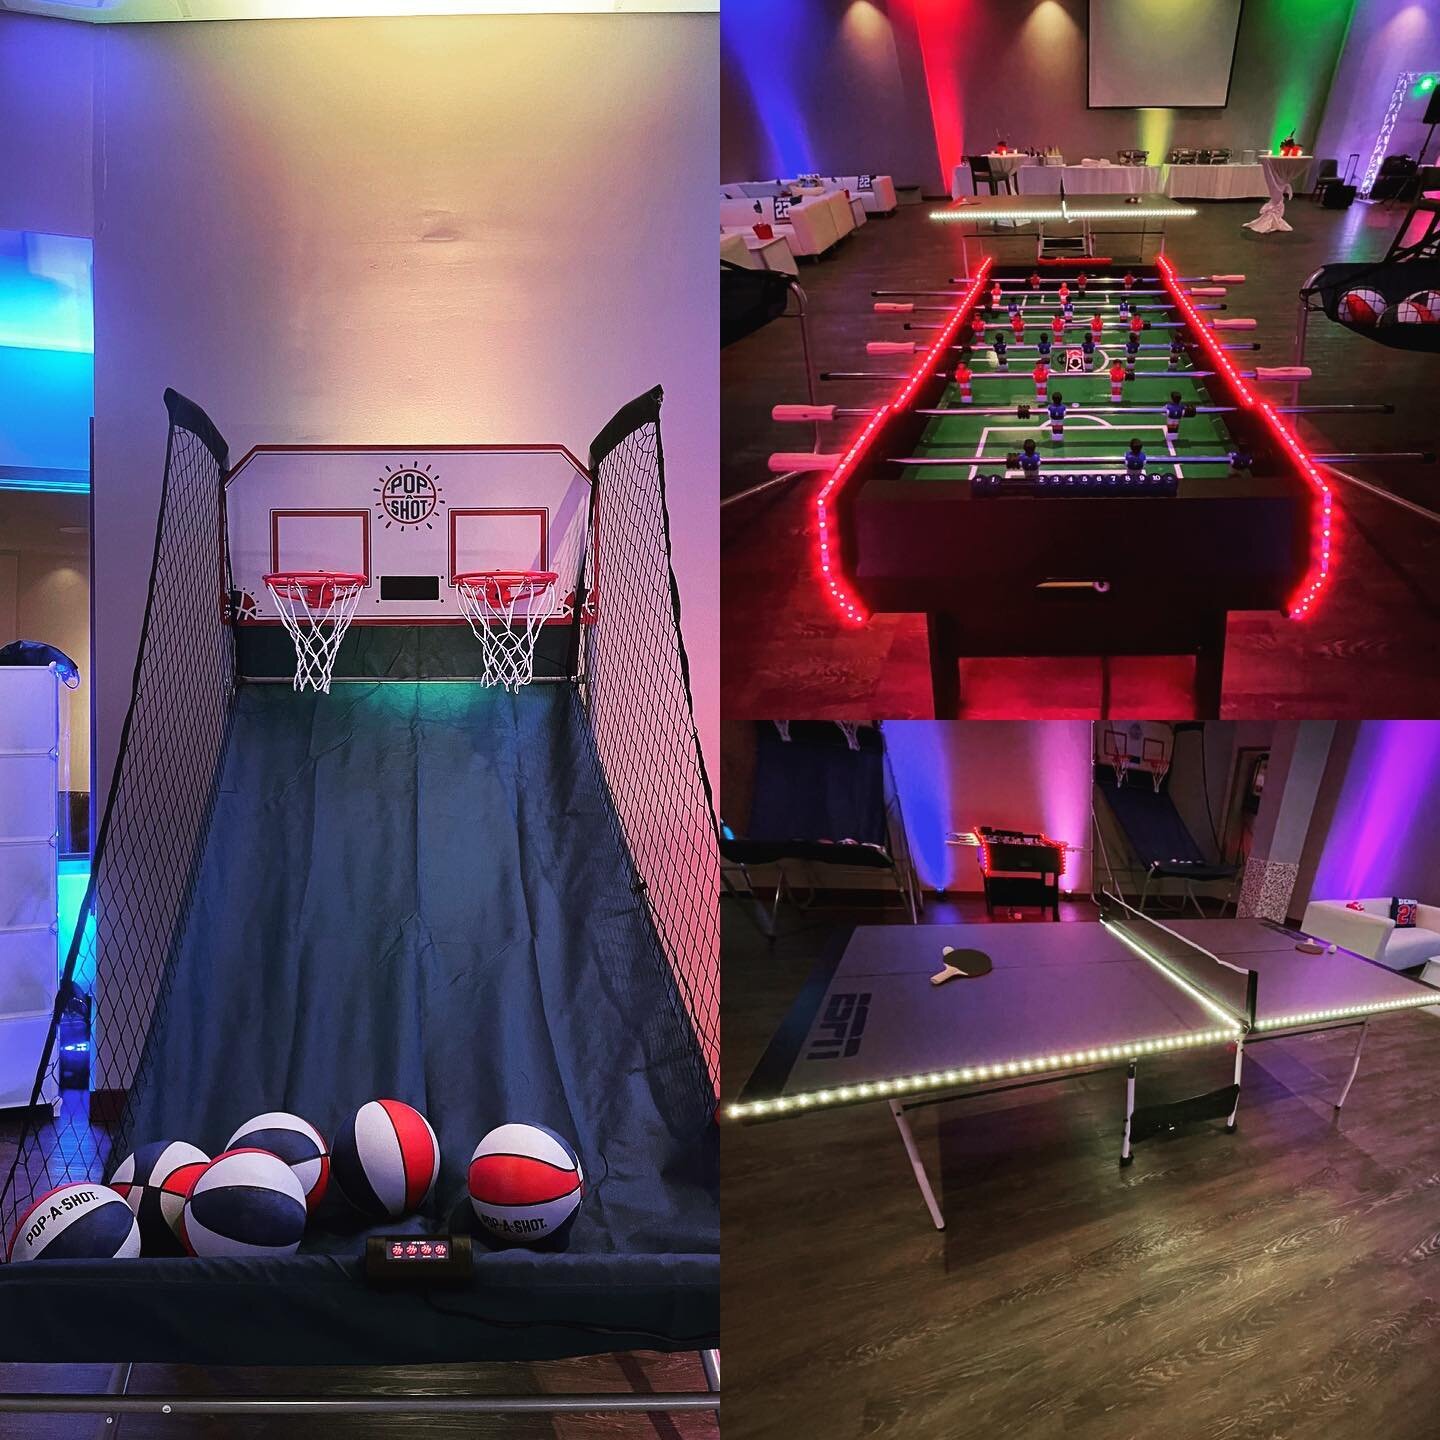 Game Rentals !
Basketball 🏀 
Ping pong 🏓 
Fuse-ball ⚽️ 

Jazz it up with led lights 💡!